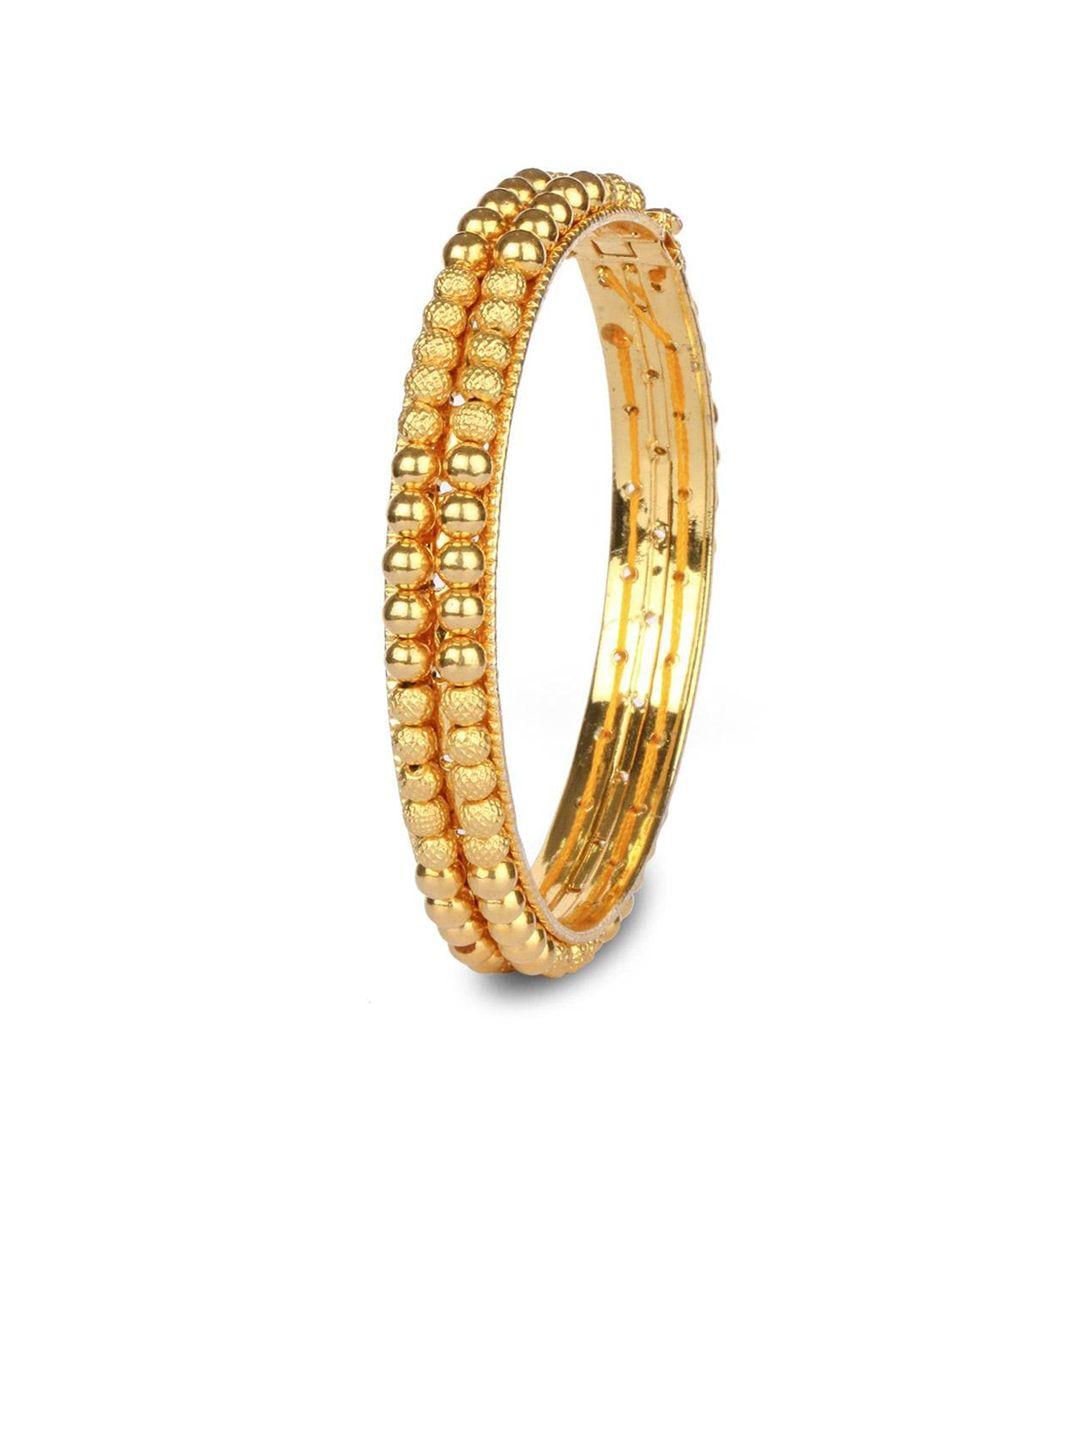 candere a kalyan jewellers company 22kt gold tushi bangle - 2.41 gm